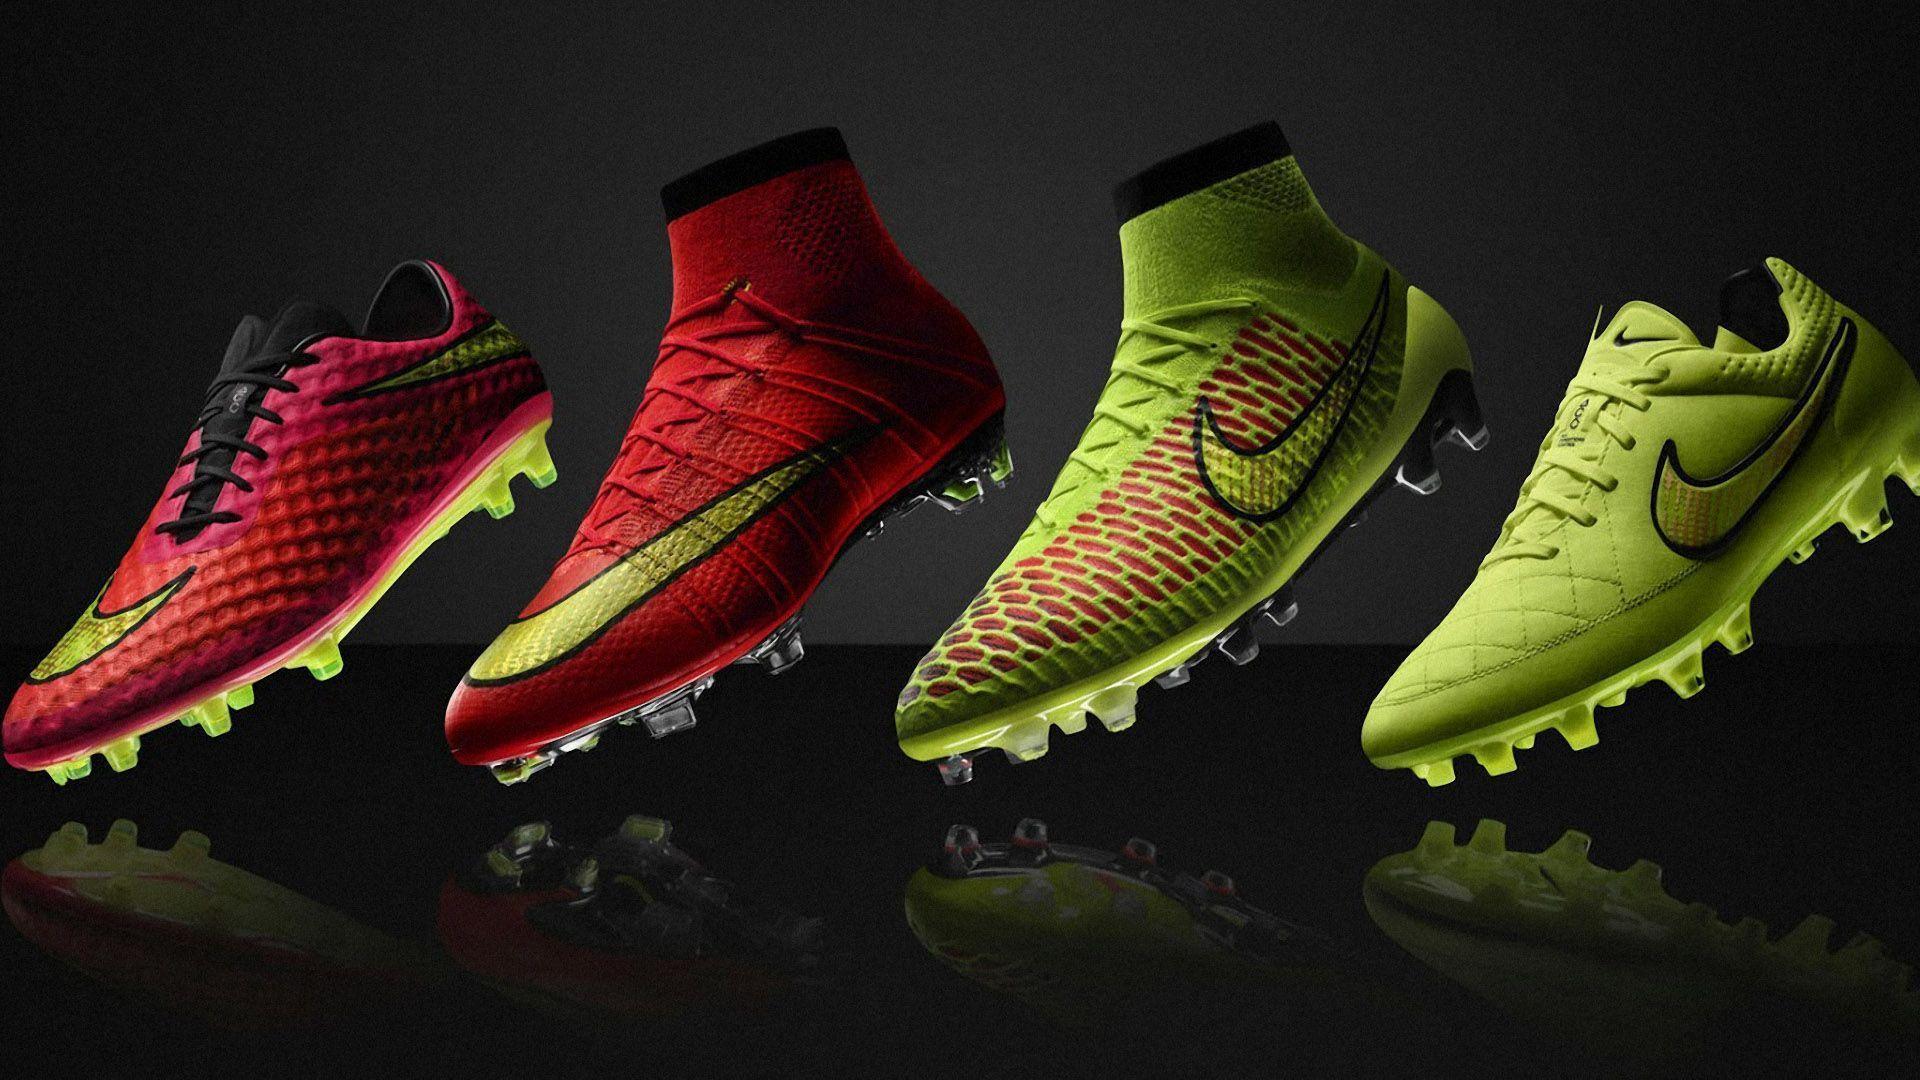 Download Computer Nike Summer 2015 Football Boots Wallpapers